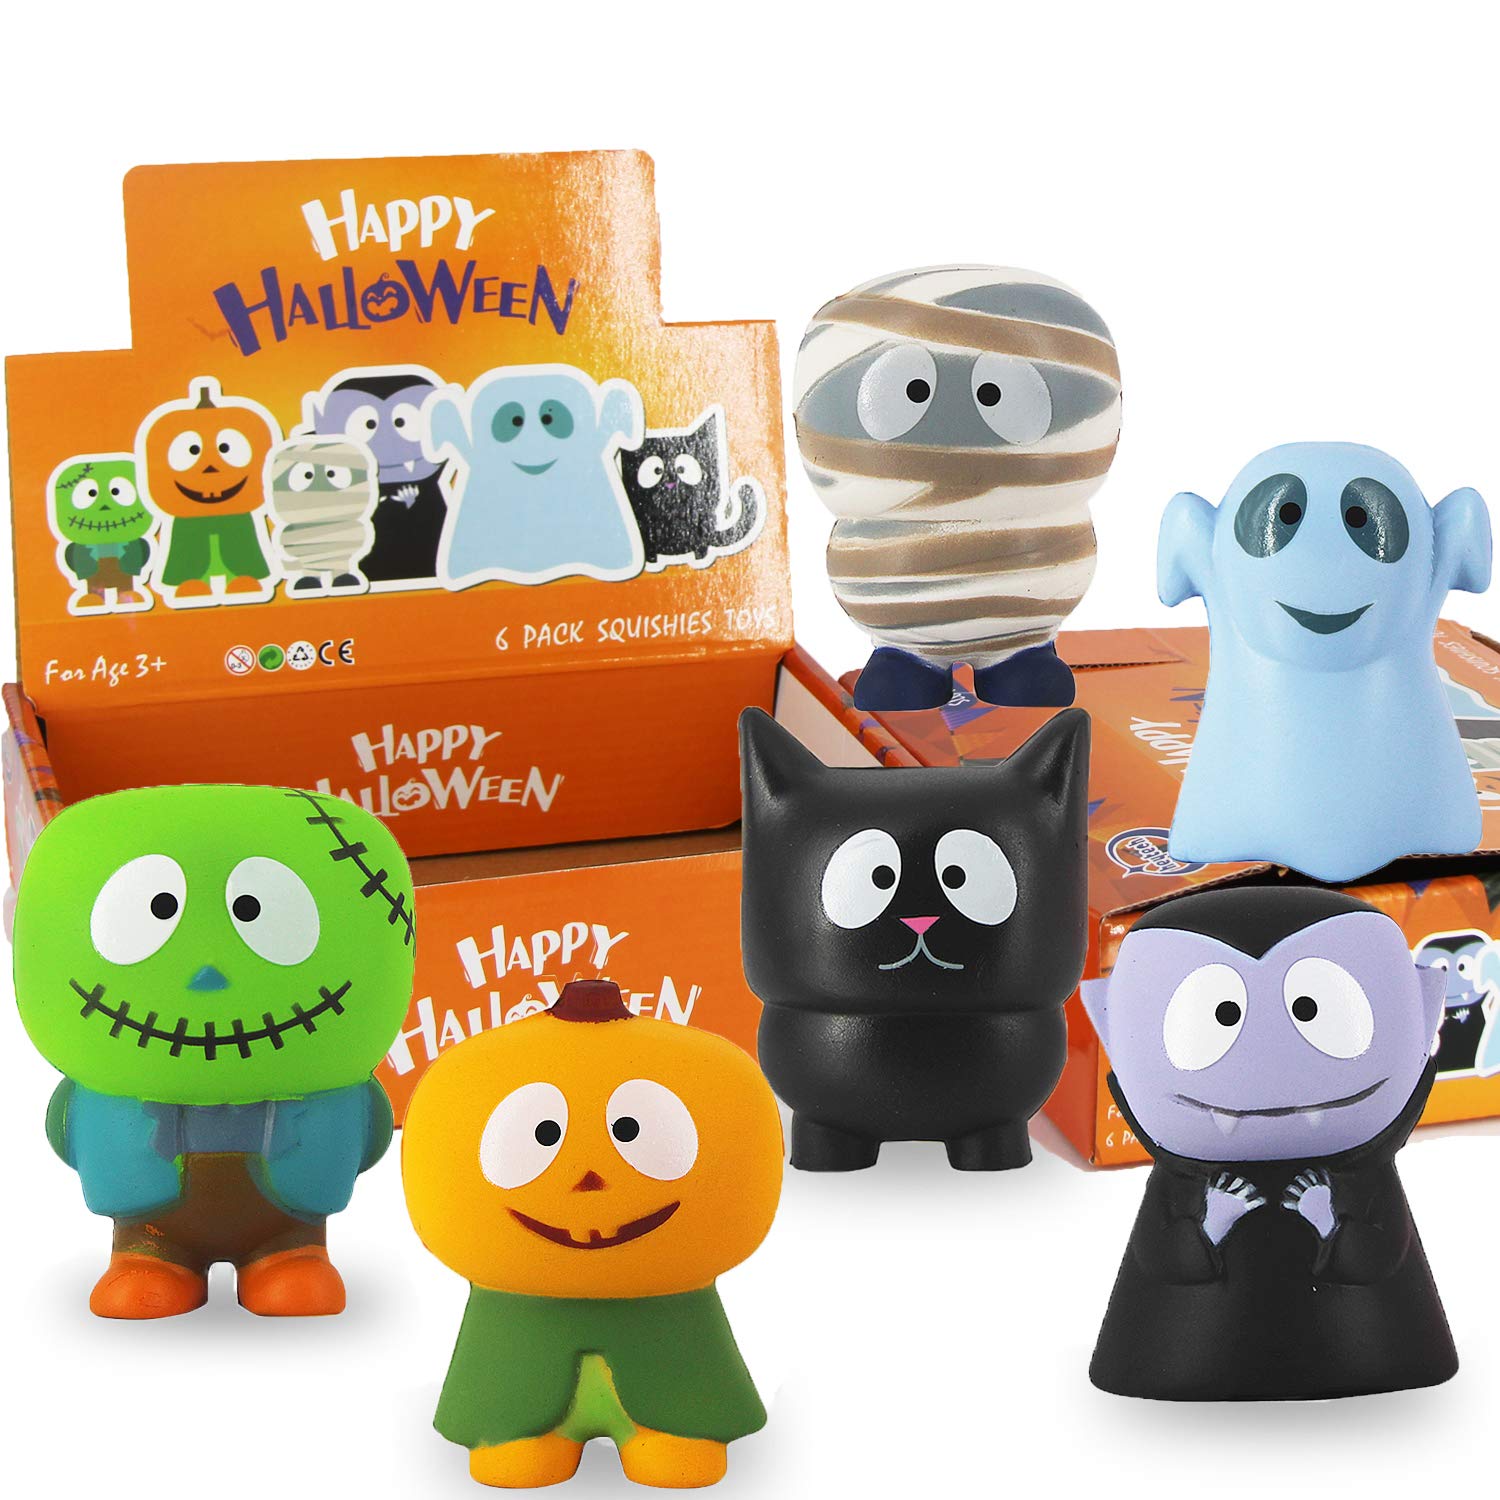 heytech 6 Packs Halloween Squishies Toys Slow Rising: Gift Box Includes Spooky, Pumpkin, Zombie,Black Cat,Mummy, Vampire Soft Squishy Toys Great Sensory Toys for Girls,Boys,Kids…